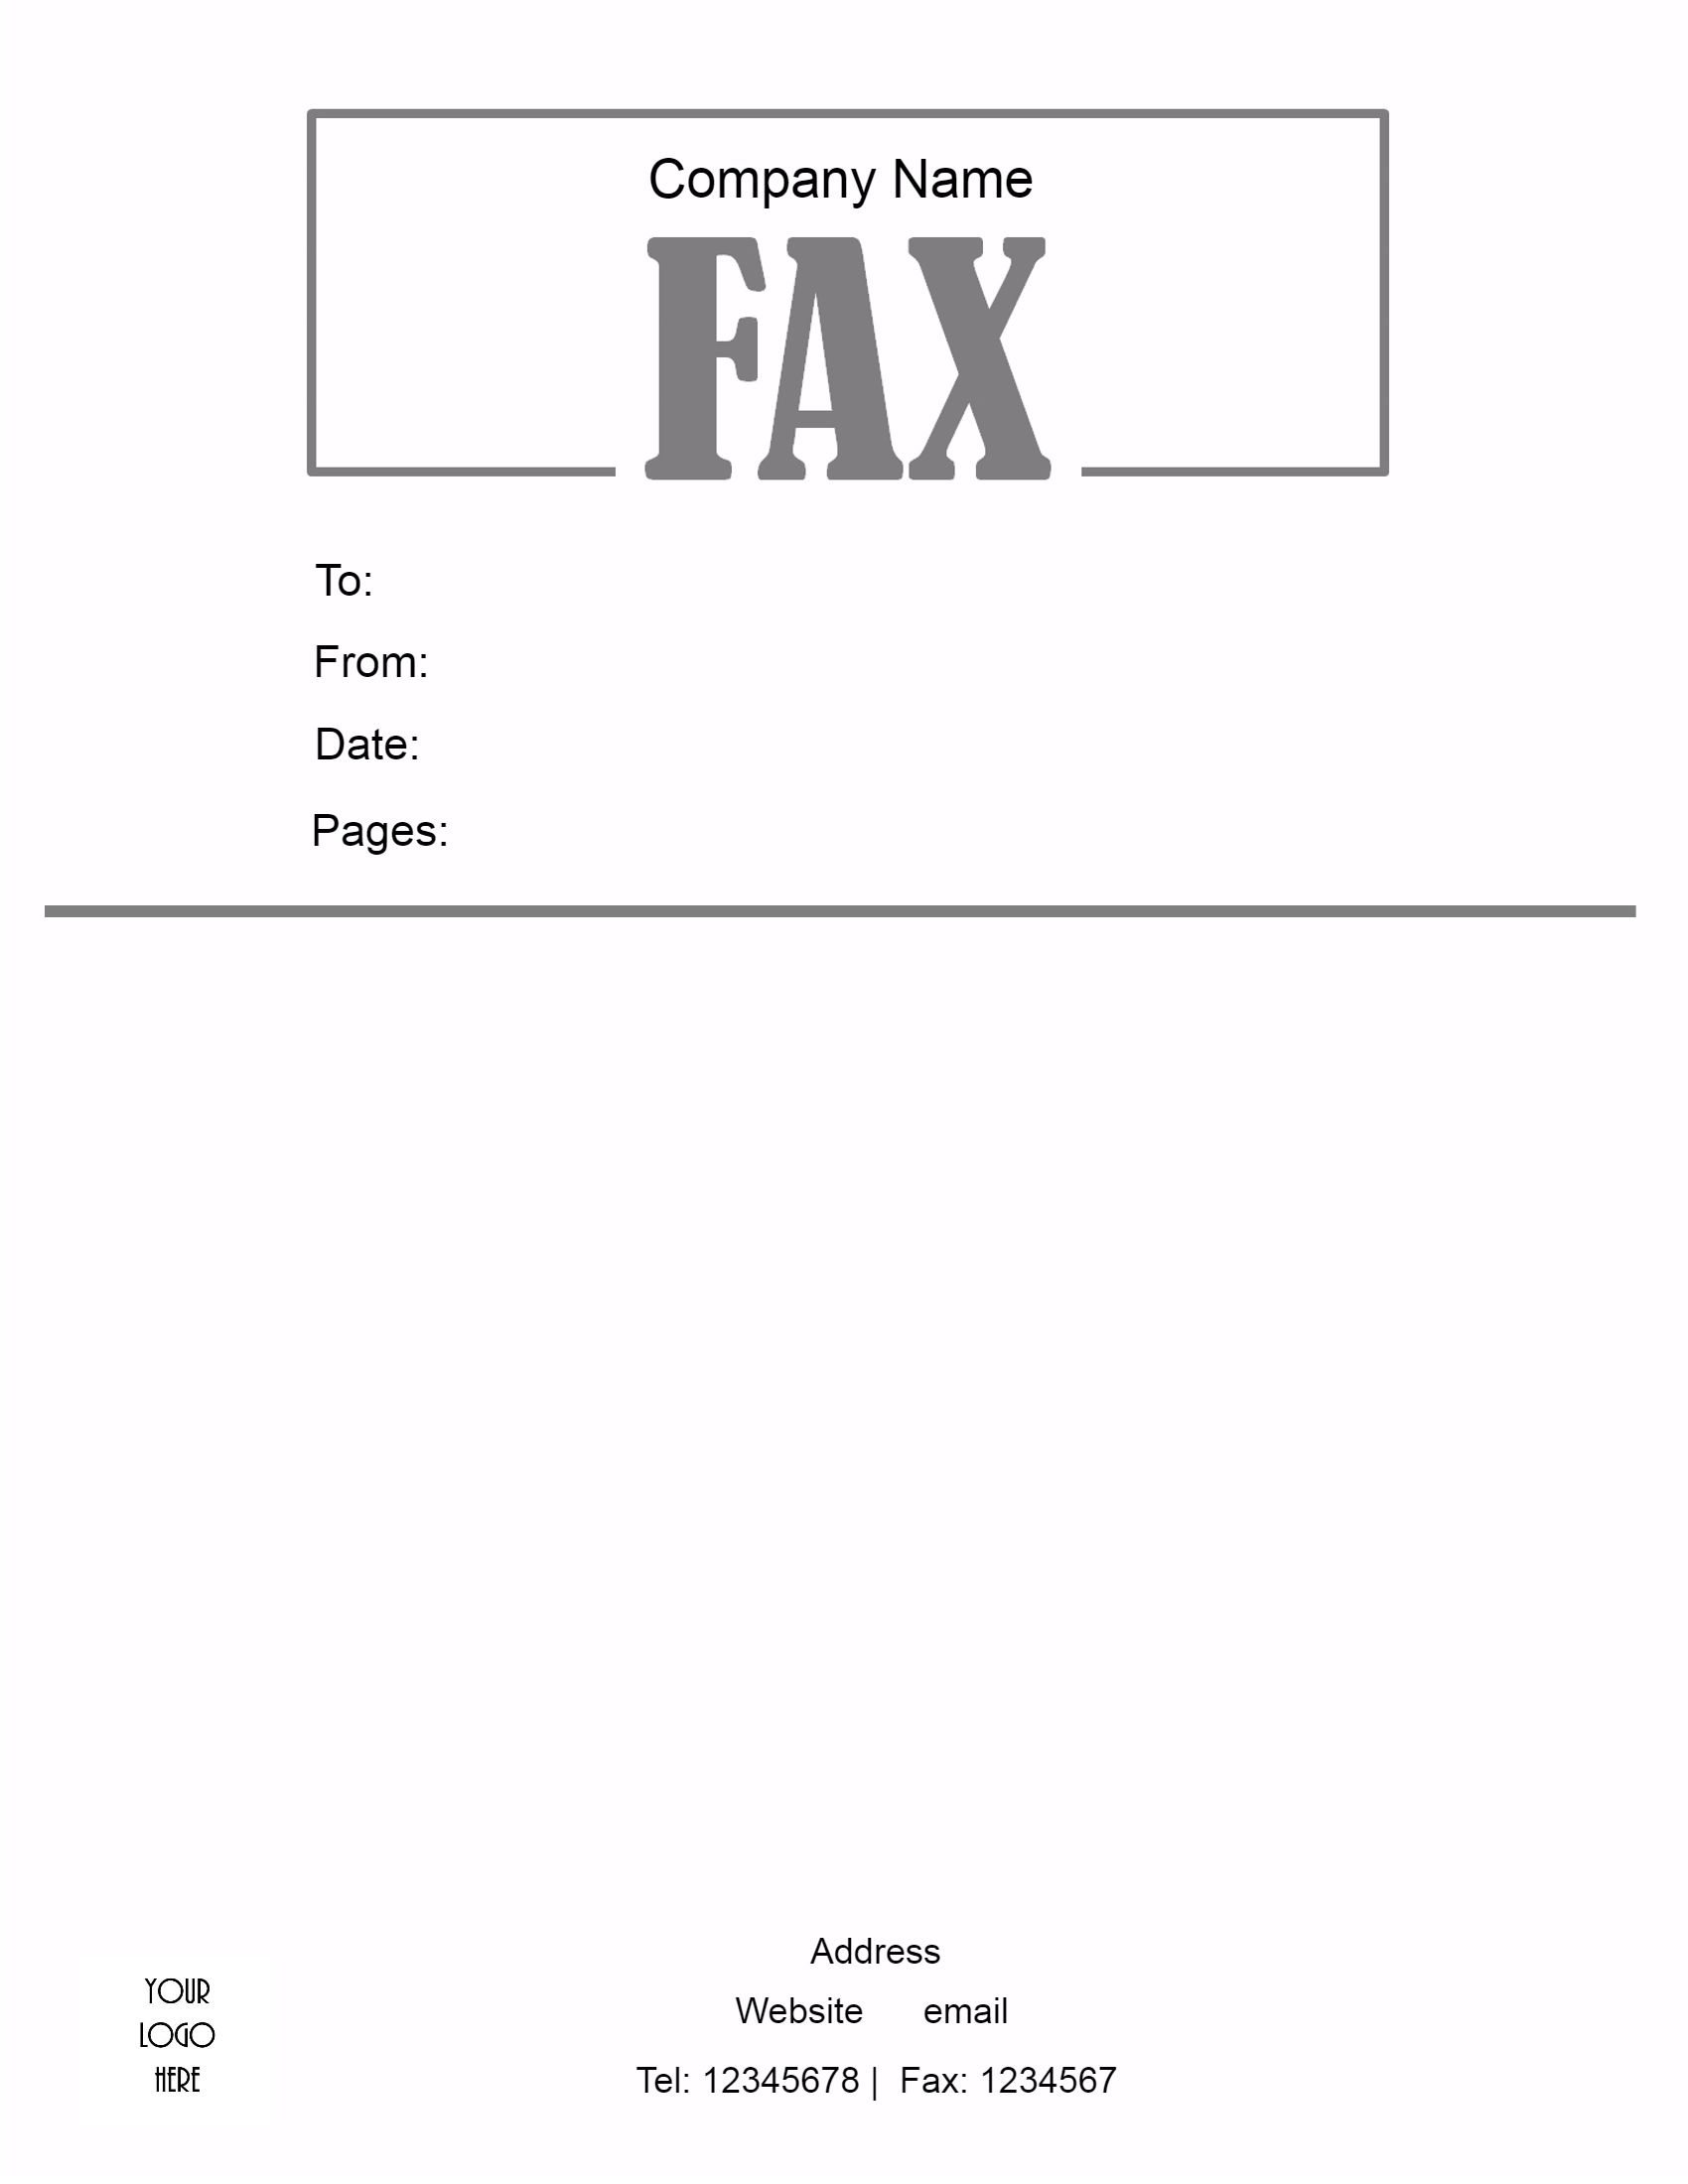 printable fax sheet cover letter